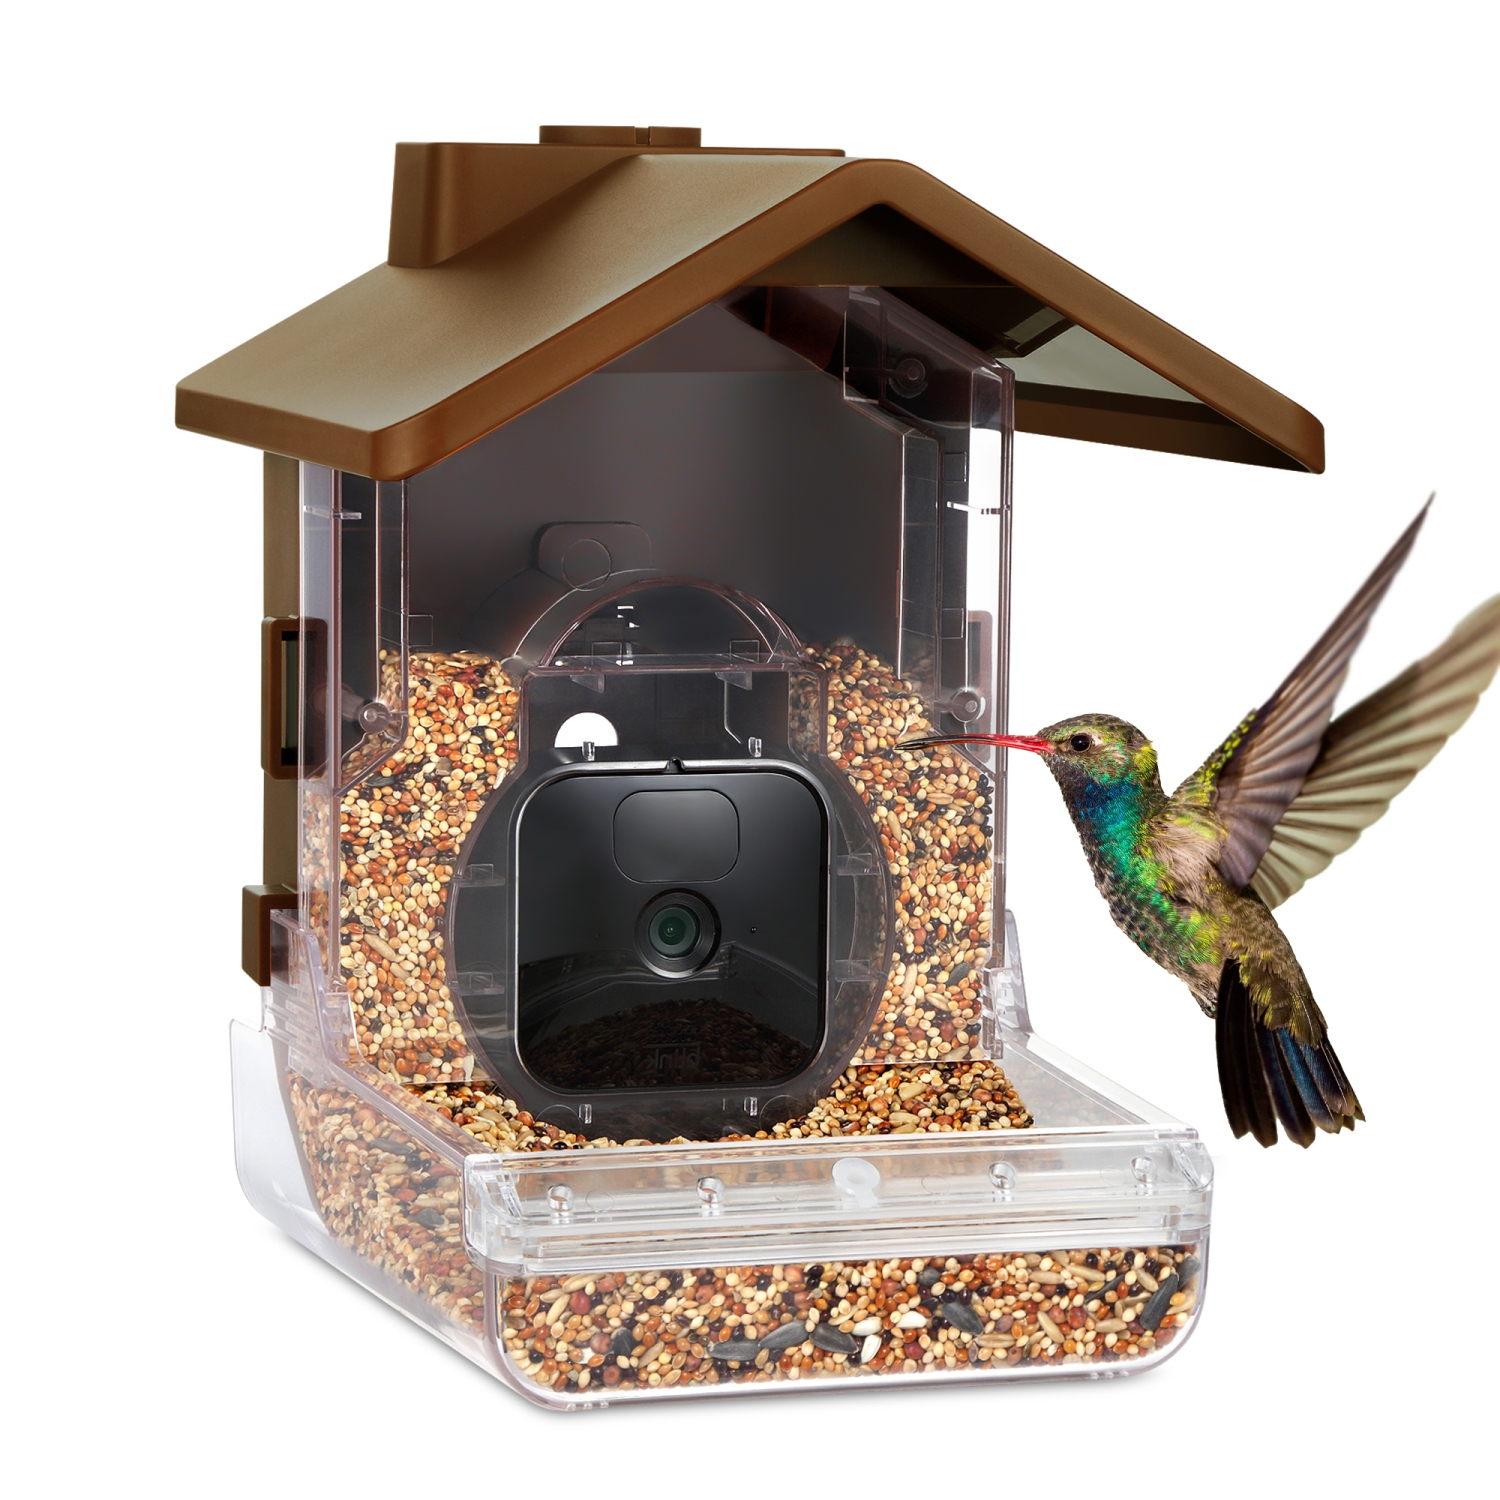 Wasserstein Bird Feeder Camera Case Compatible with Blink, Wyze, and Ring Cam- Bird Feeder for Bird Watching with Your Security Cam - (Camera NOT Included)